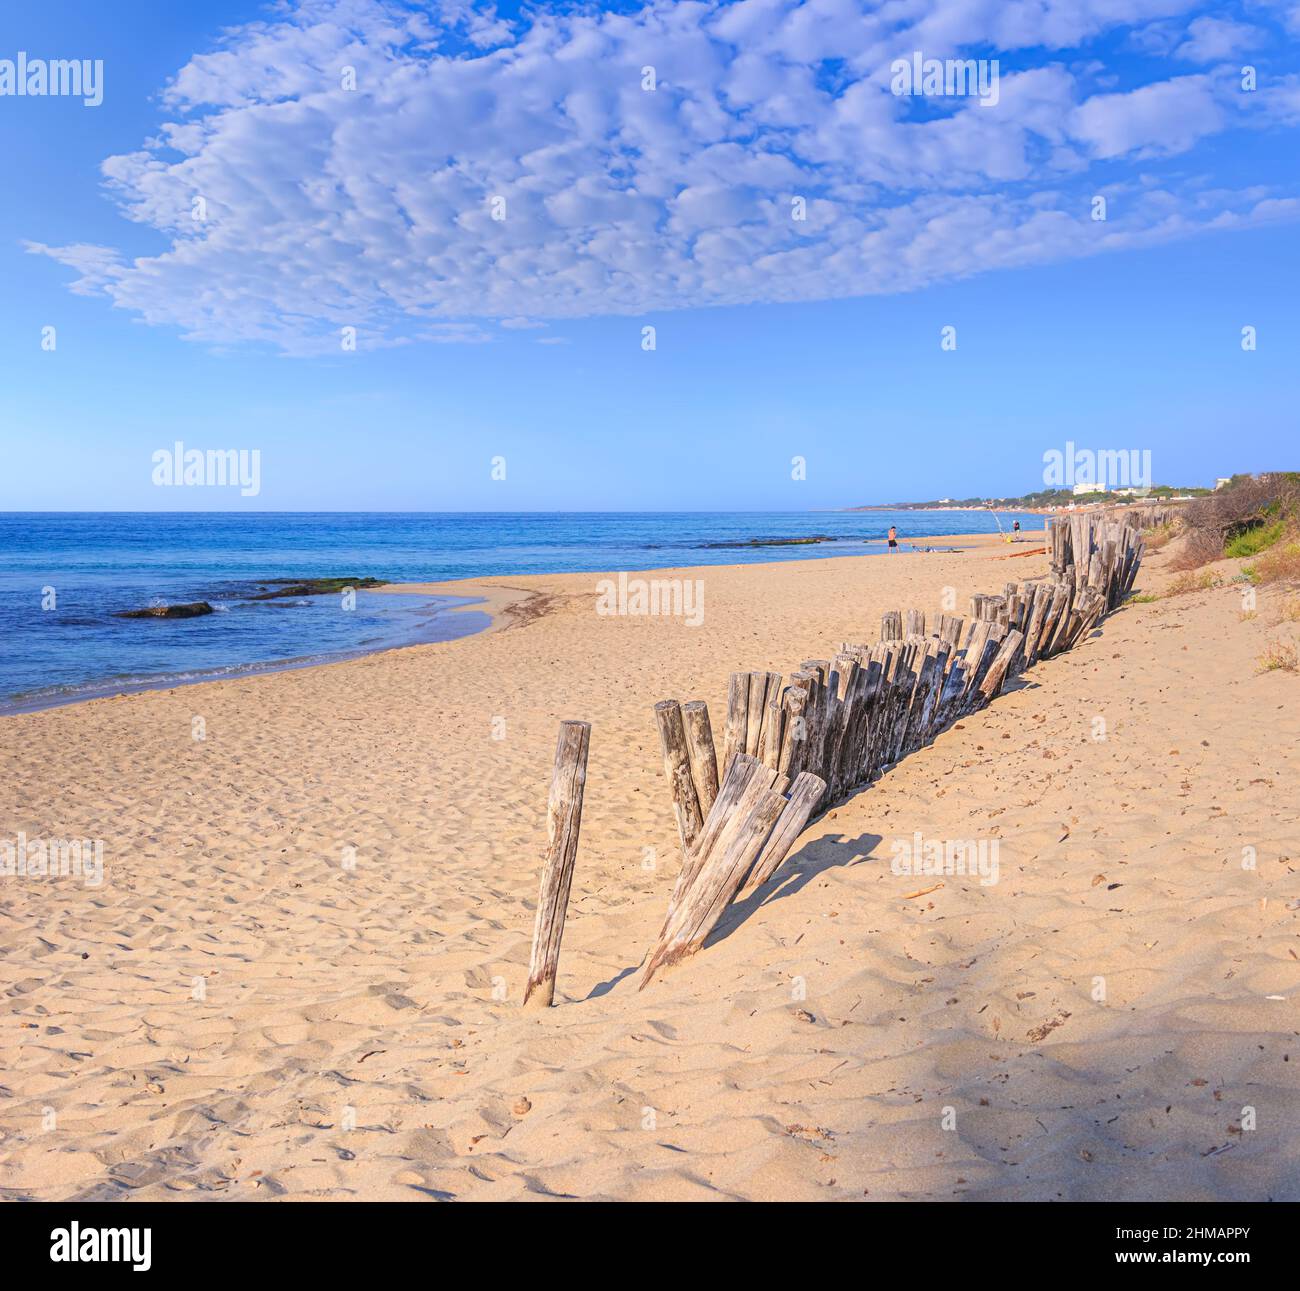 Summertime: fence on the beach in Puglia, Italy: the sandy beach of San Pietro in Bevagna, a natural oasis in front of the blue Ionian sea,. Stock Photo